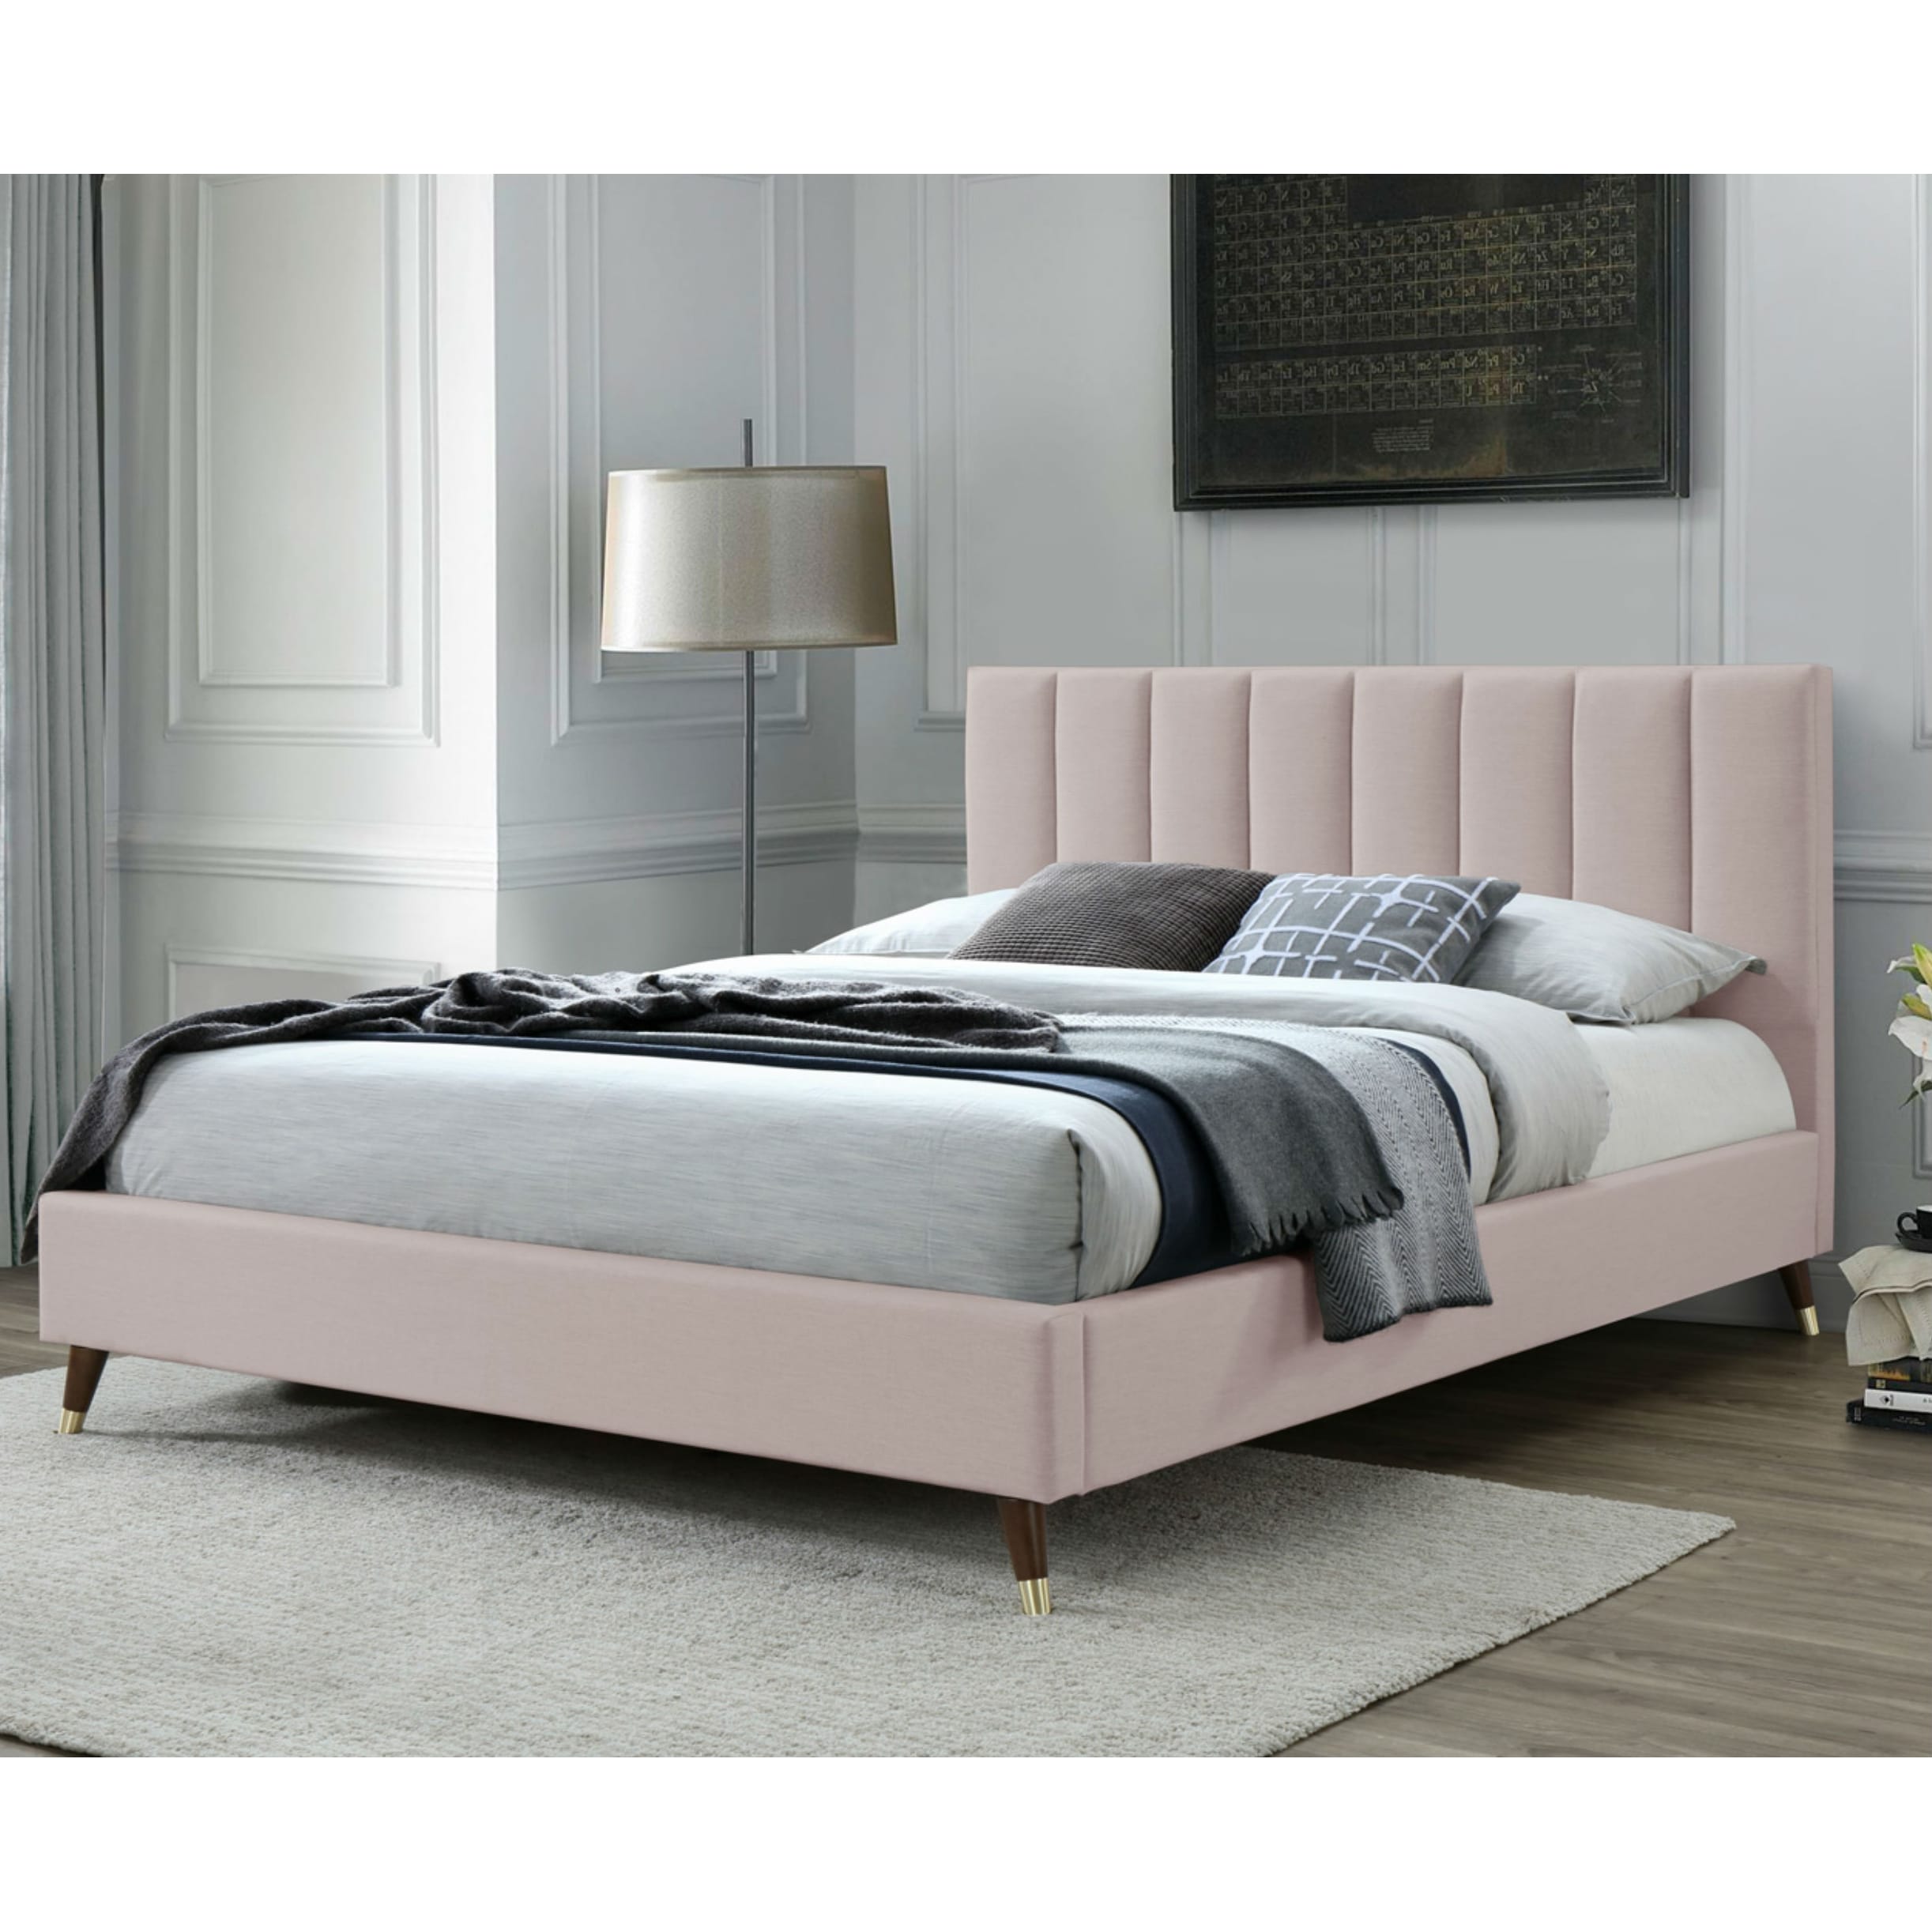 https://ak1.ostkcdn.com/images/products/is/images/direct/d7566b4bc4999f8790e0a783974552e497bf4193/Colette-Platform-Bed.jpg